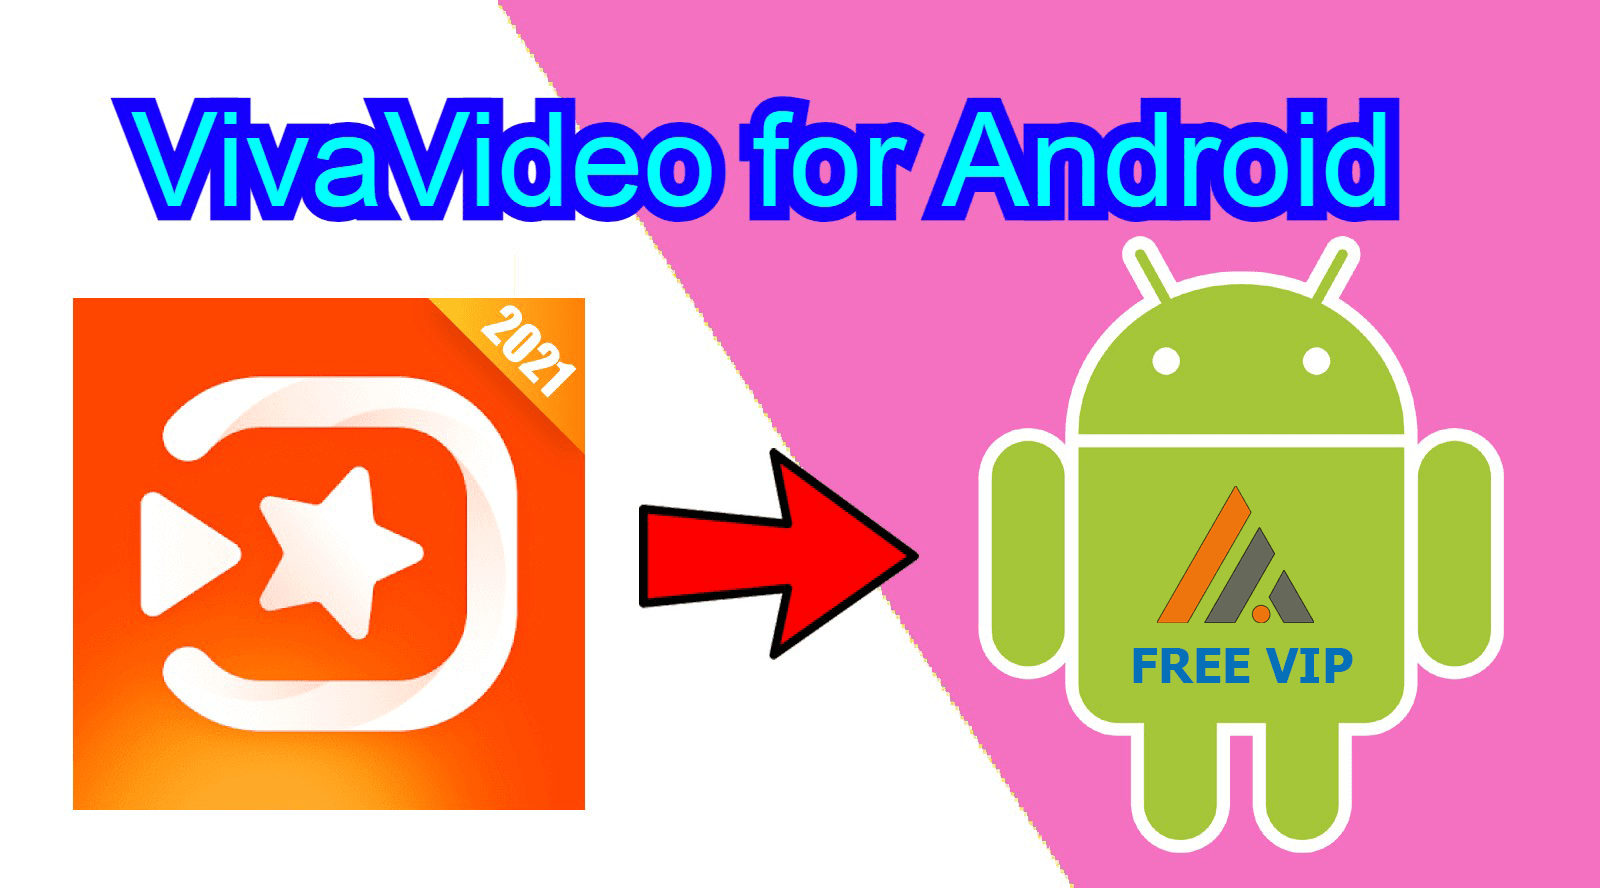 ViviaVideo for Android VIP free Download